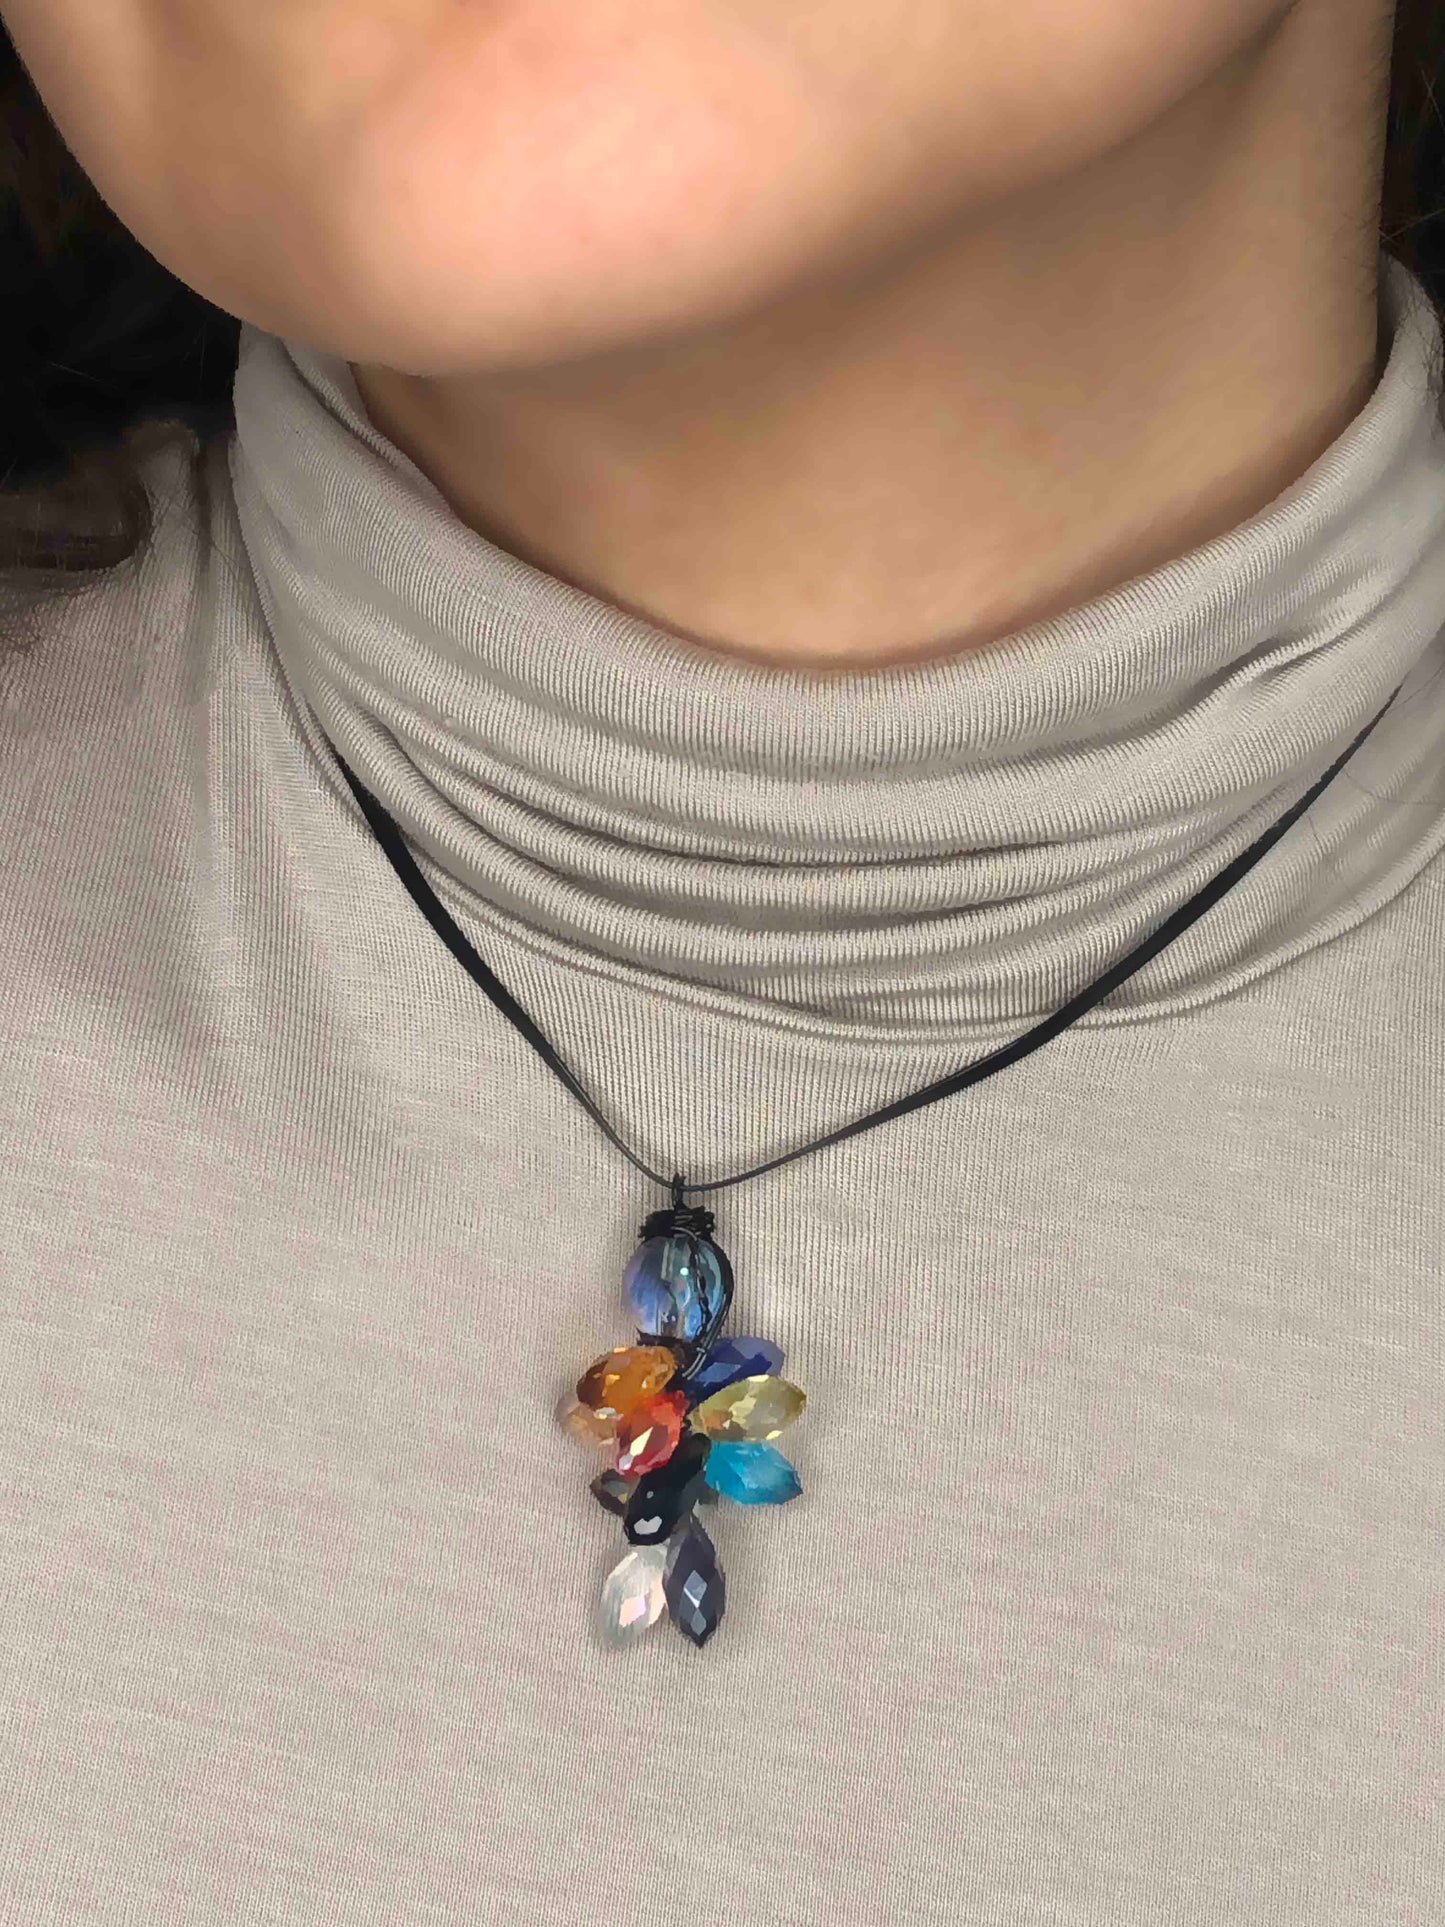 handcrafted wire wrapped crystal necklace made using multicolored teardrop crystal beads with a glass ball bead on top